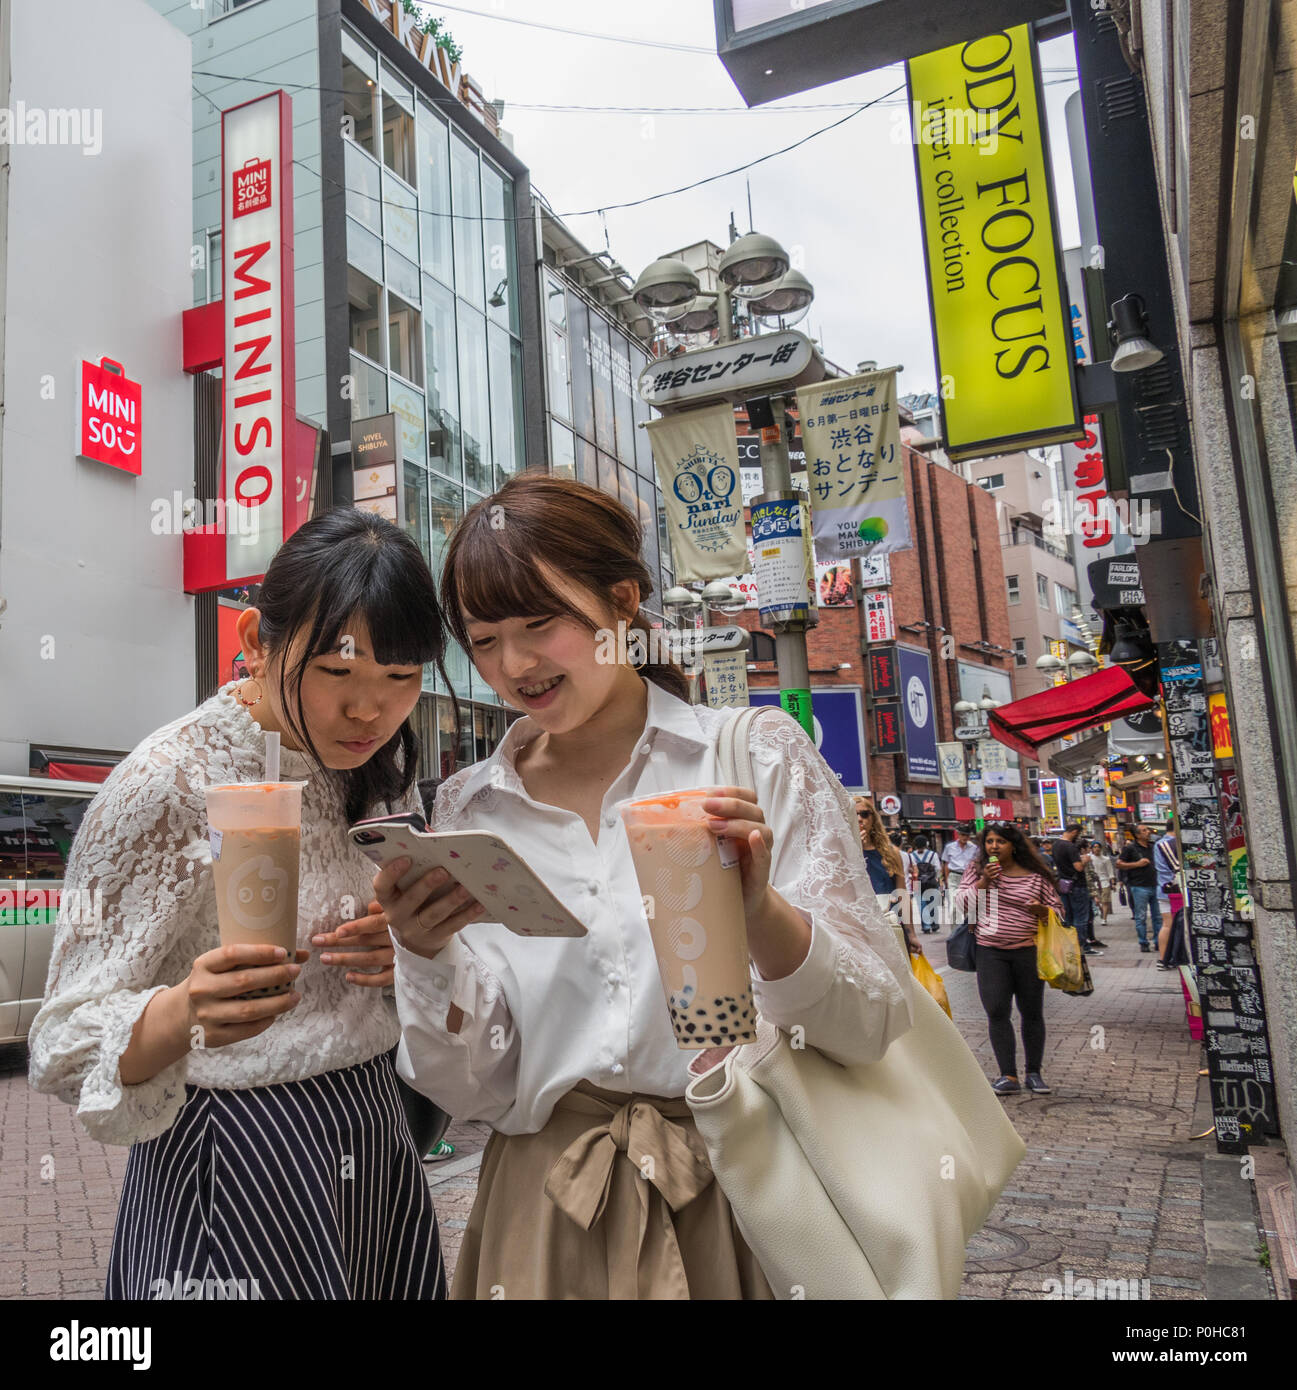 Two young women, holding drink cups, enjoy reading a text message on mobile phone, Shibuya street, Tokyo, Japan Stock Photo